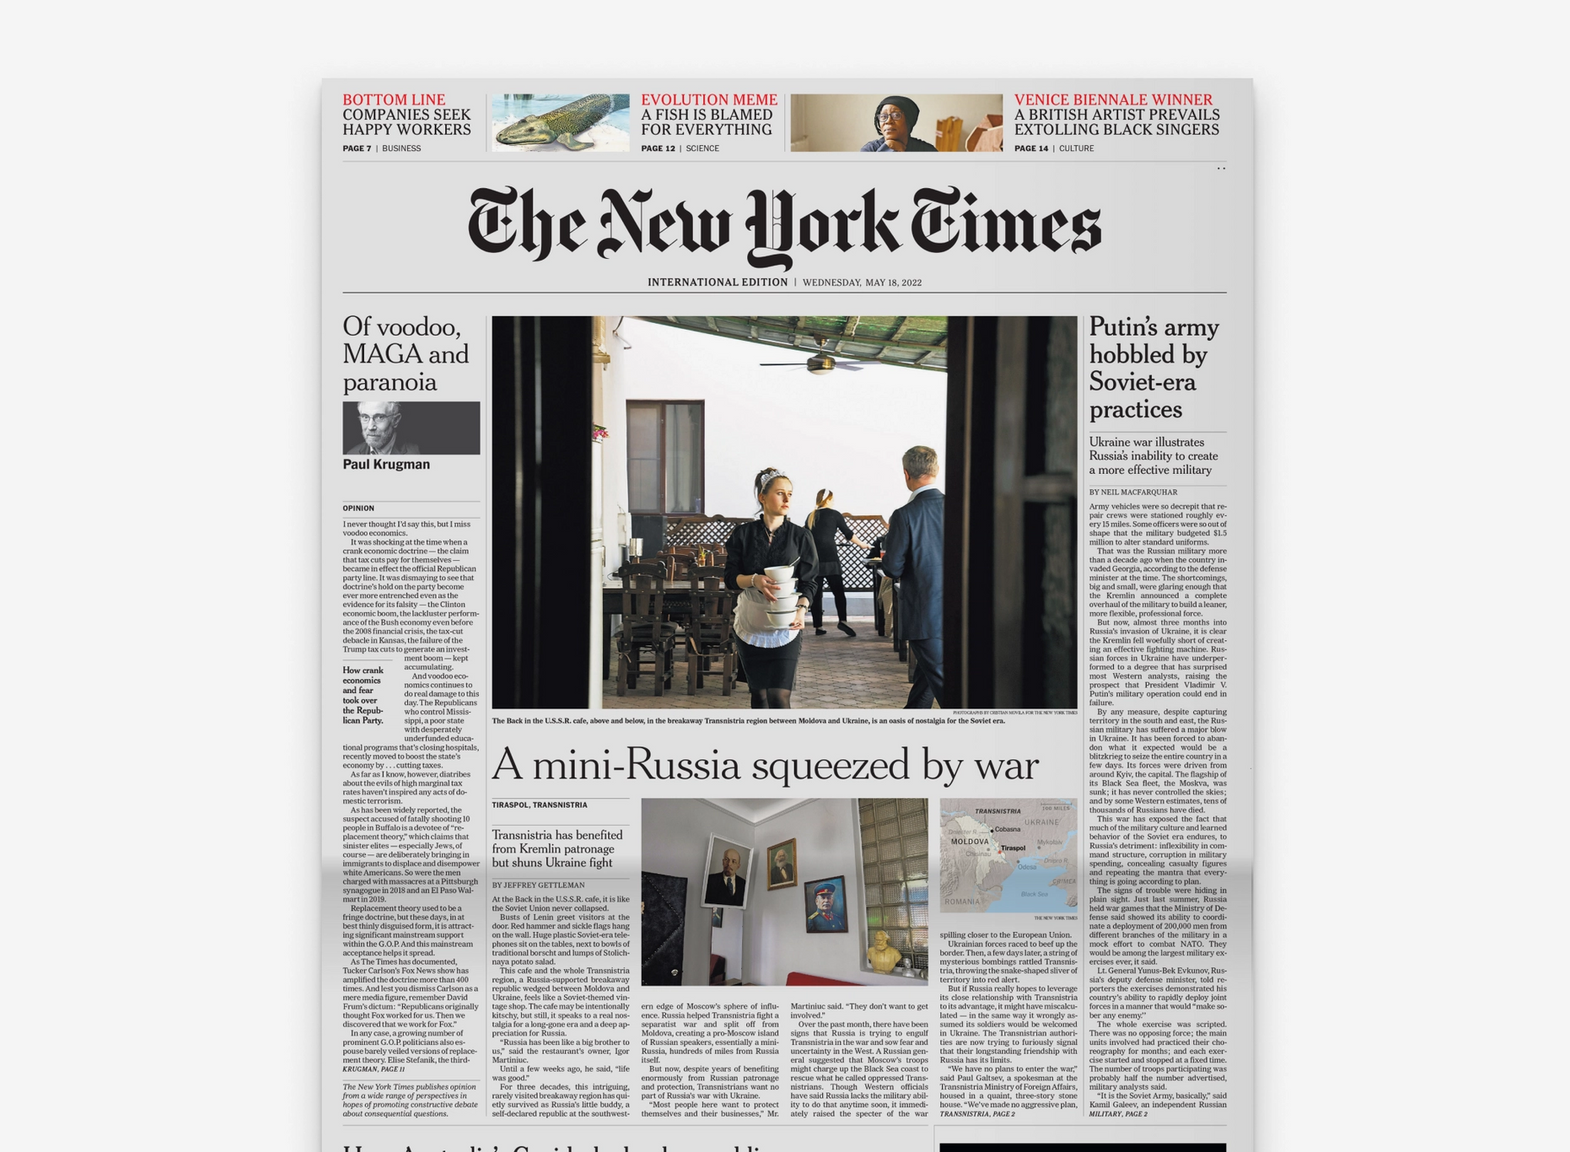 Back in Print - The New York Times